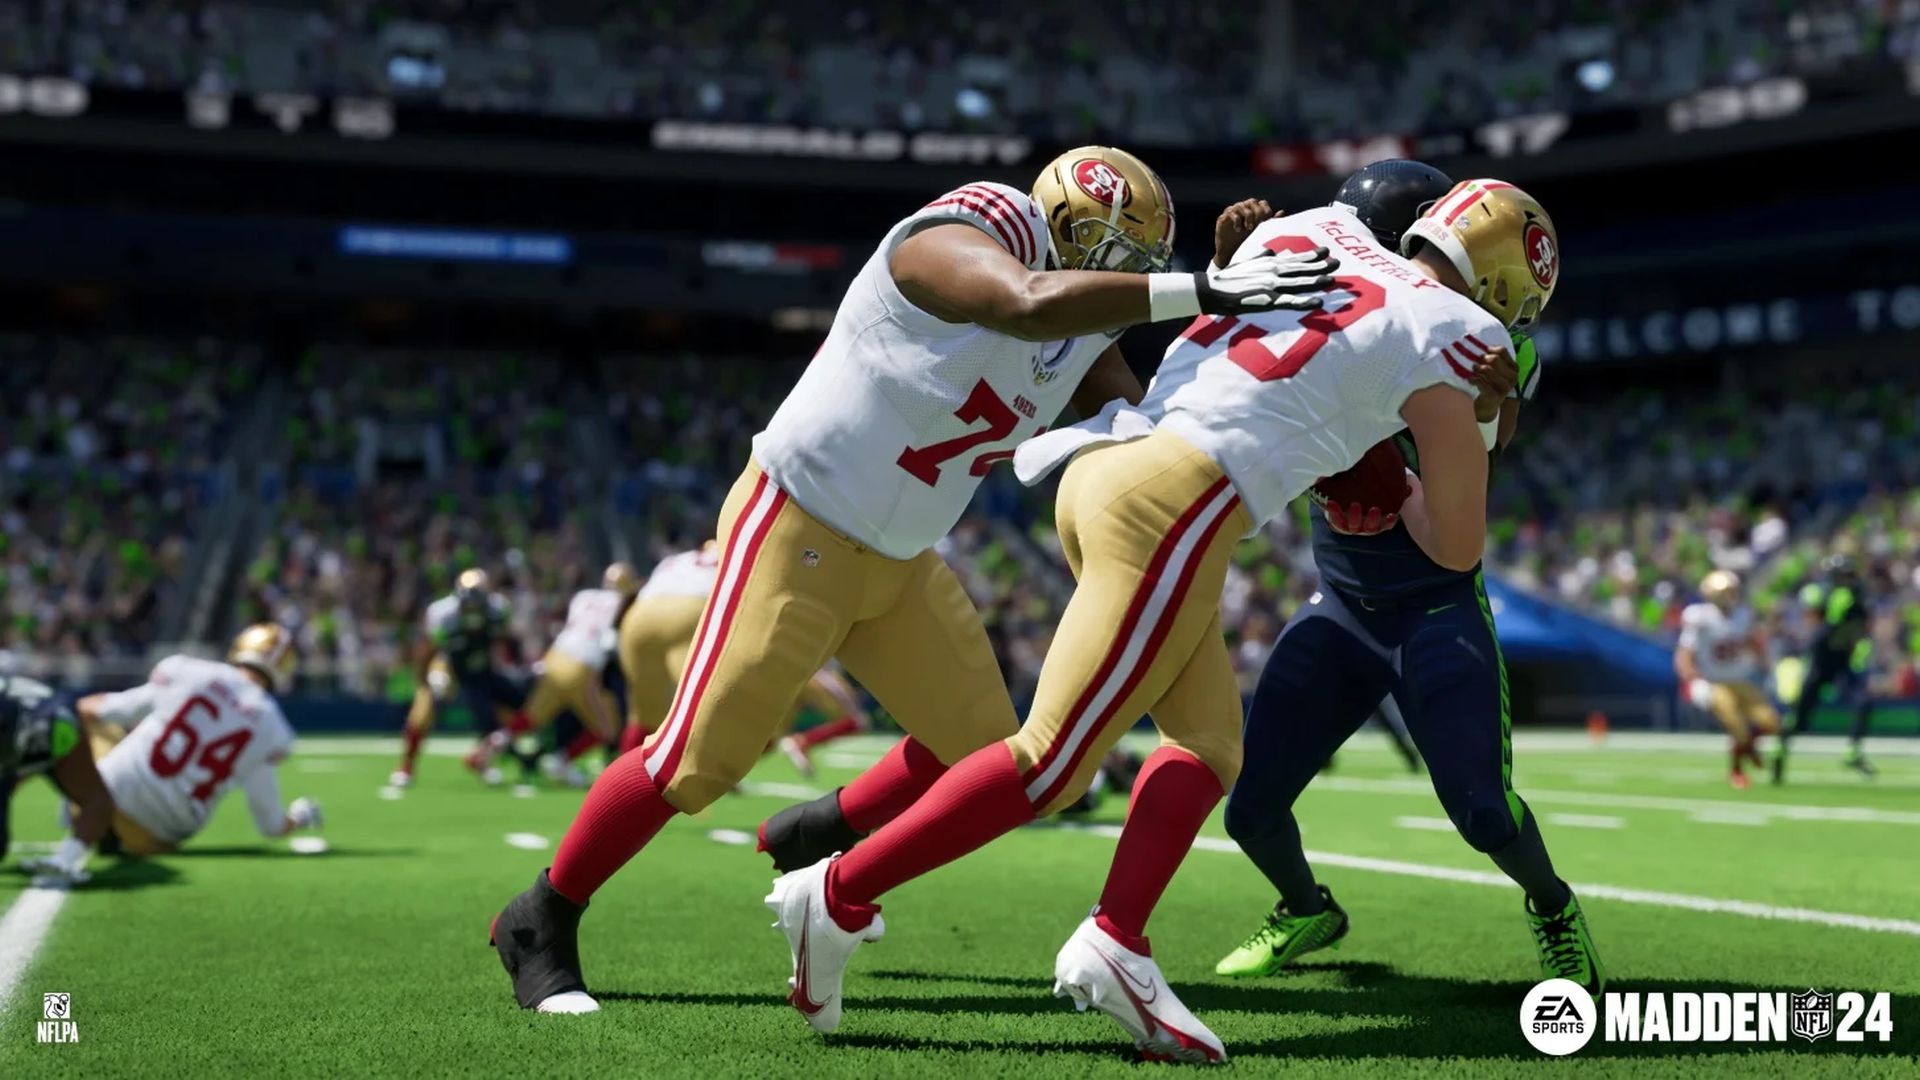 Madden NFL 24 Announced for PC and Consoles on August 18